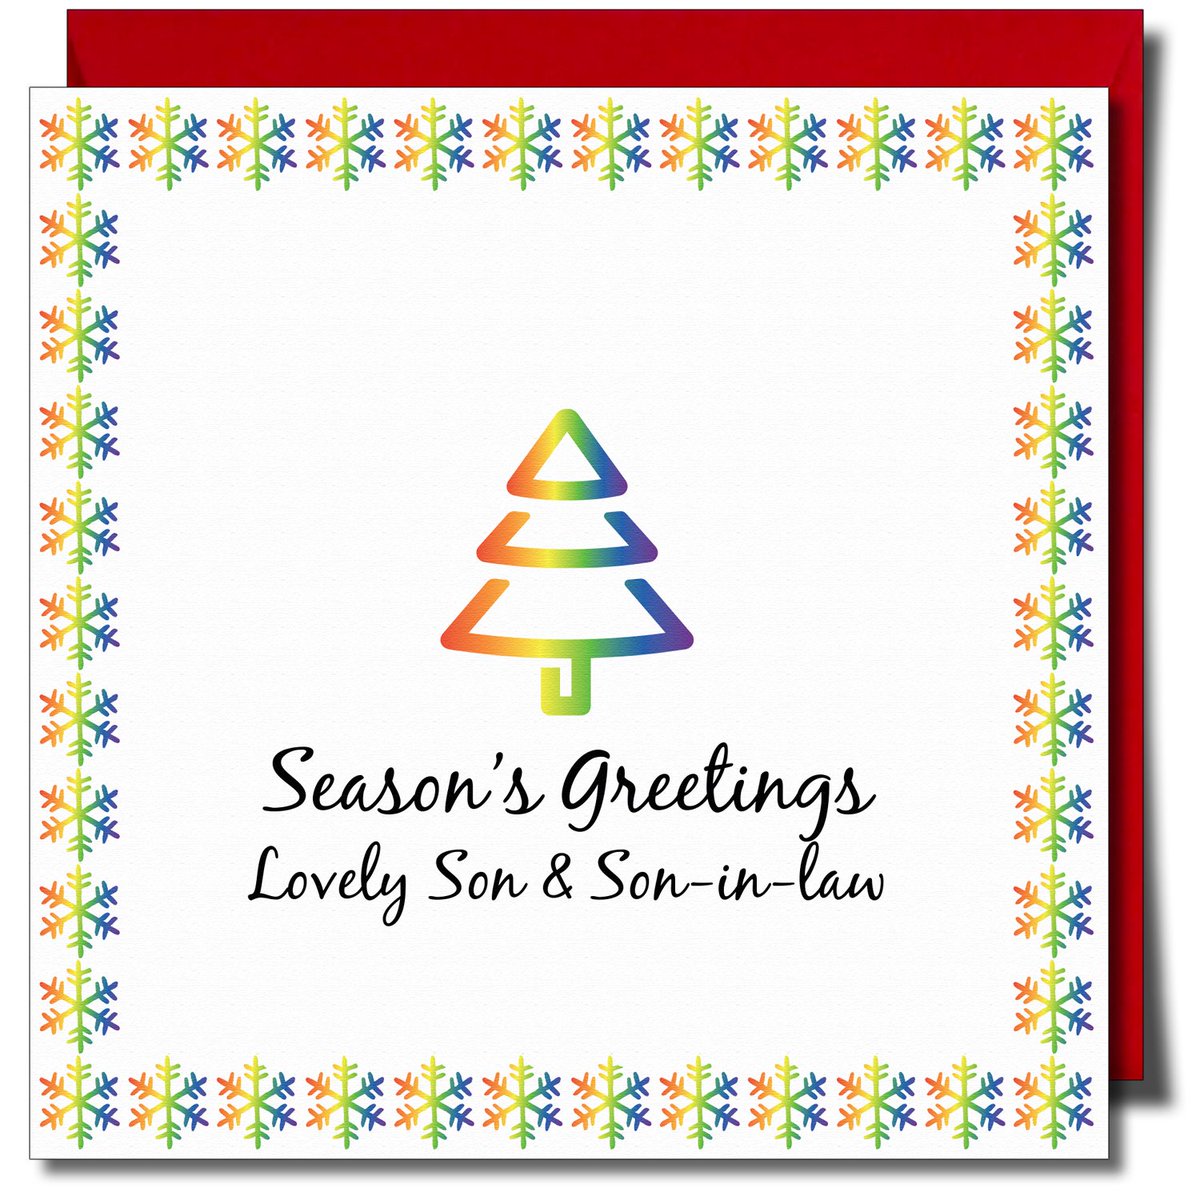 It will soon be here🎄
Visit linktr.ee/julieswp to shop 🌈
#womaninbizhour #mhhsbd #gaycards #lgbtqfamily 
Please rt X